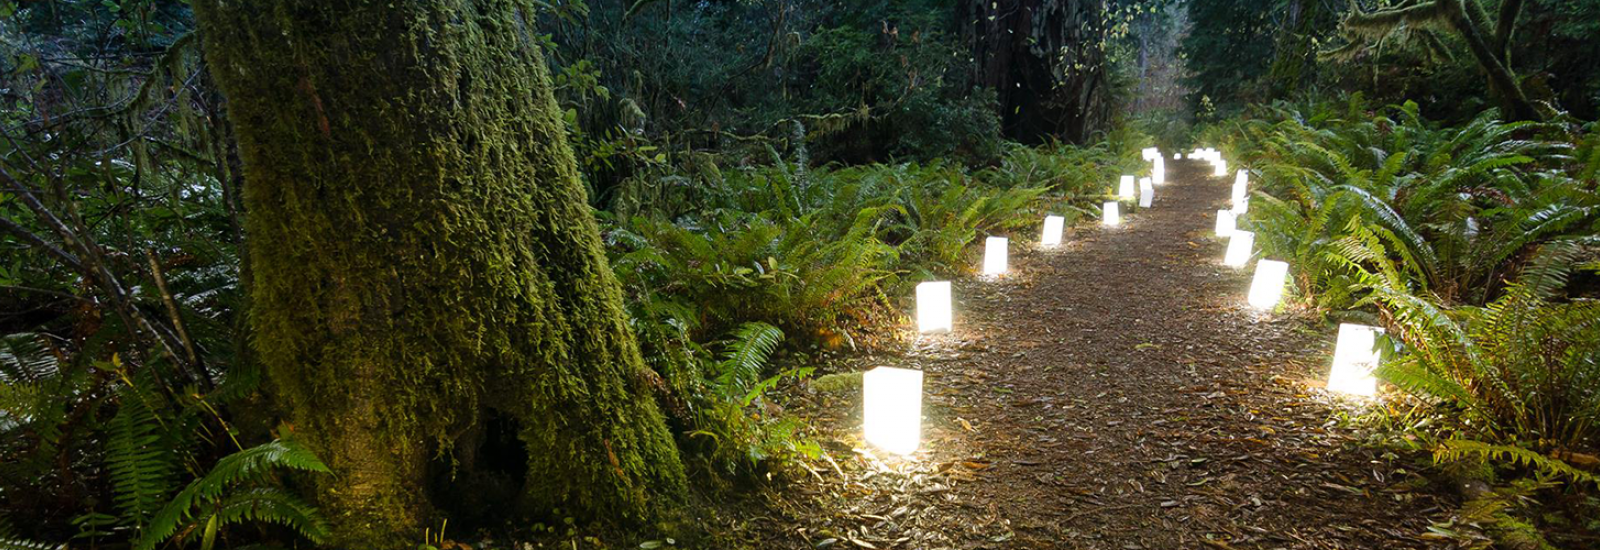 A Candlelight Walk Among the Redwoods